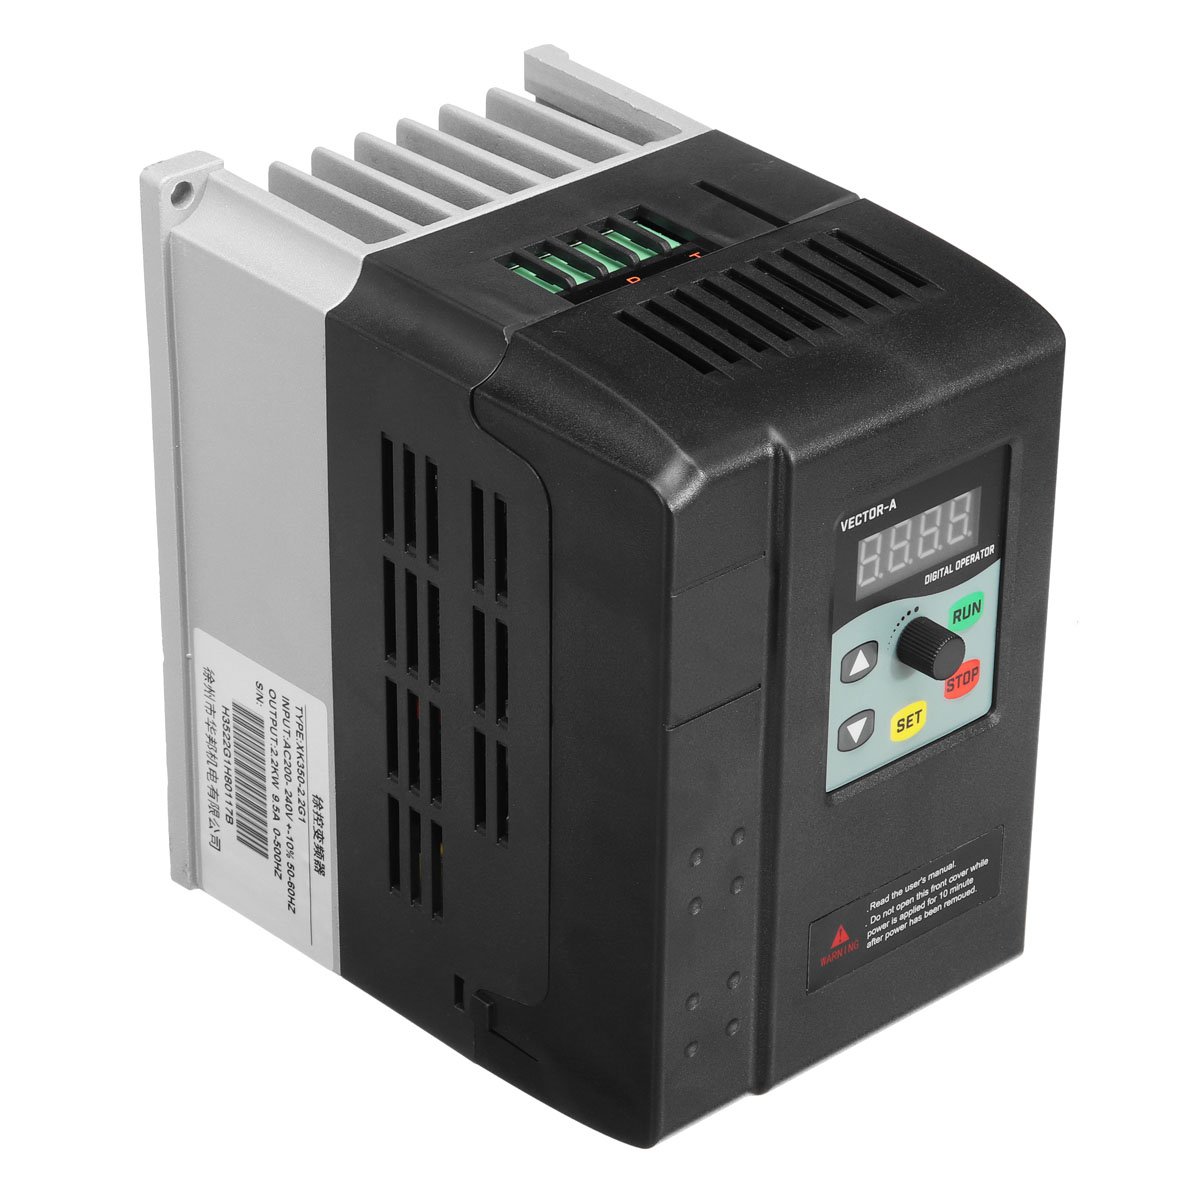 22KW-220V-95A-1HP-To-3-Phase-Variable-Frequency-Inverter-Motor-Drive-VSD-VFD-1392464-4